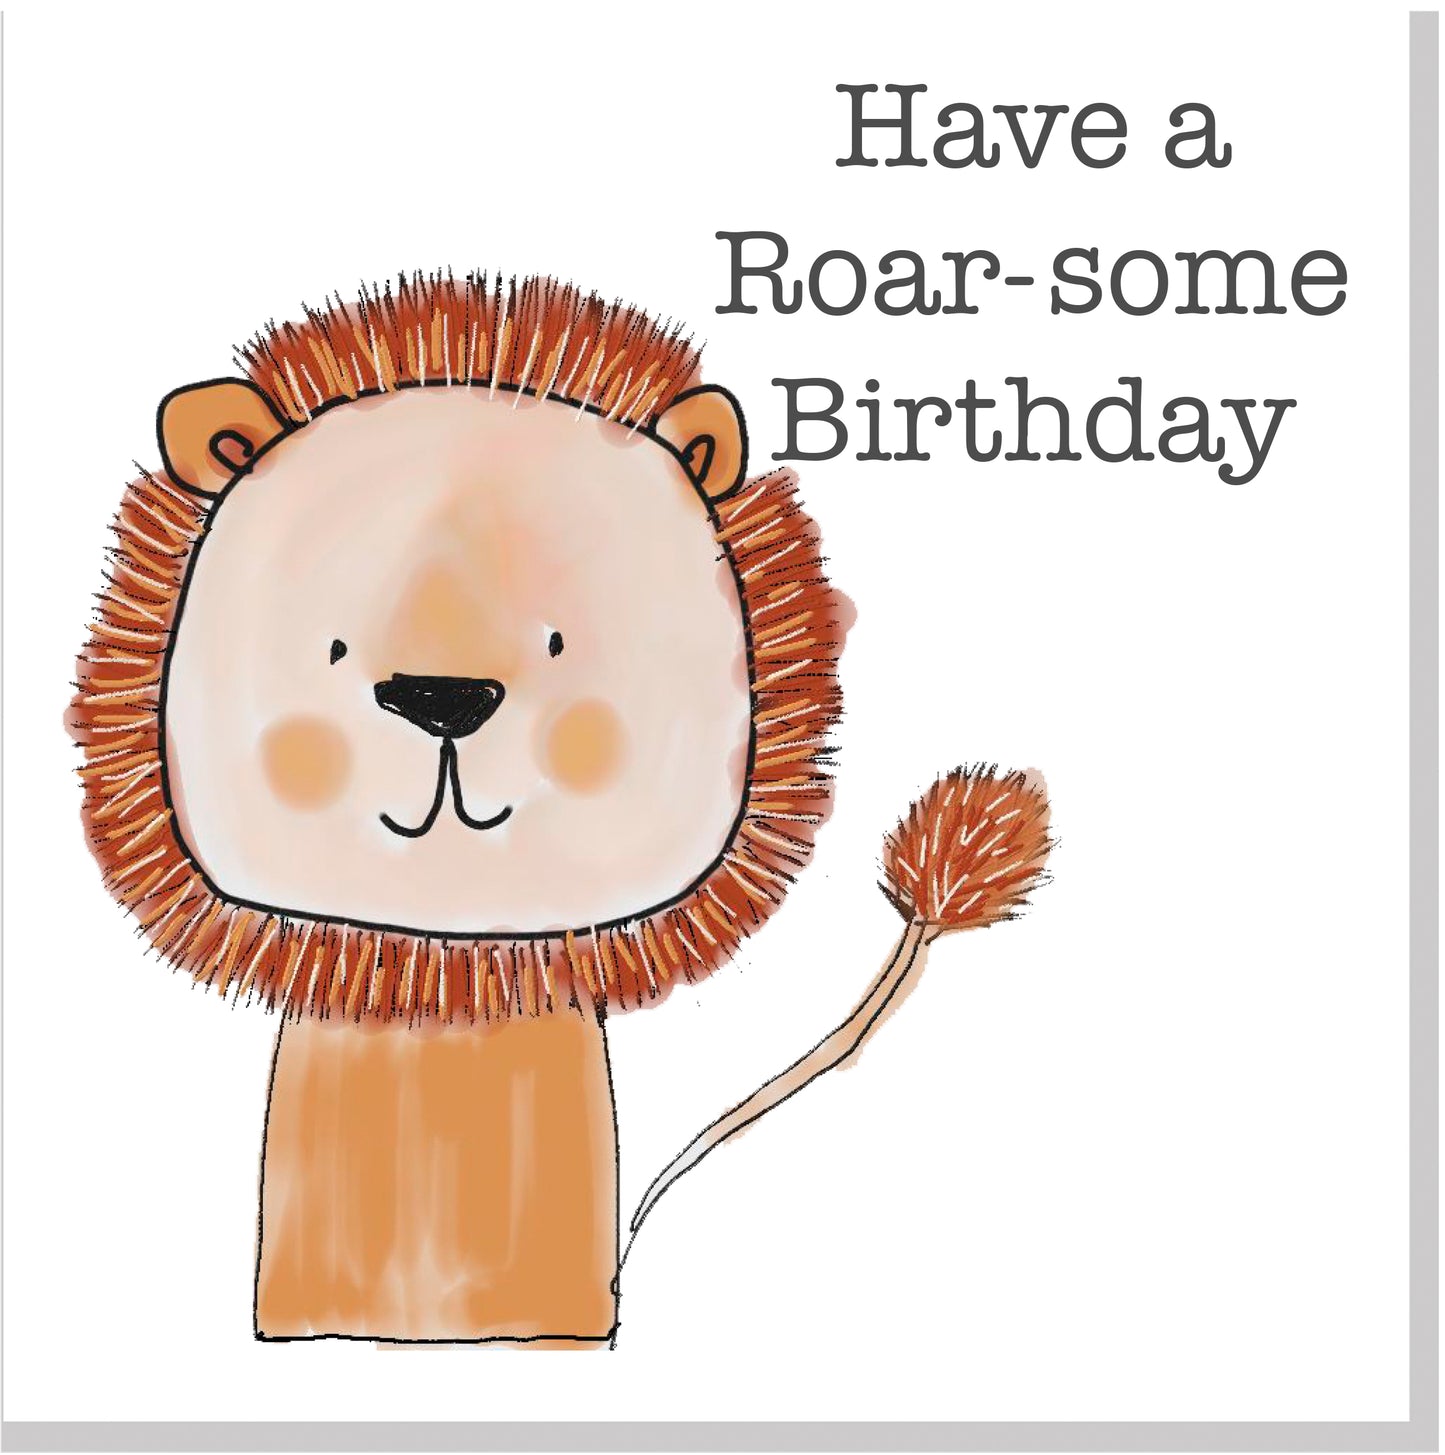 Have a Roar-some Birthday Lion square card